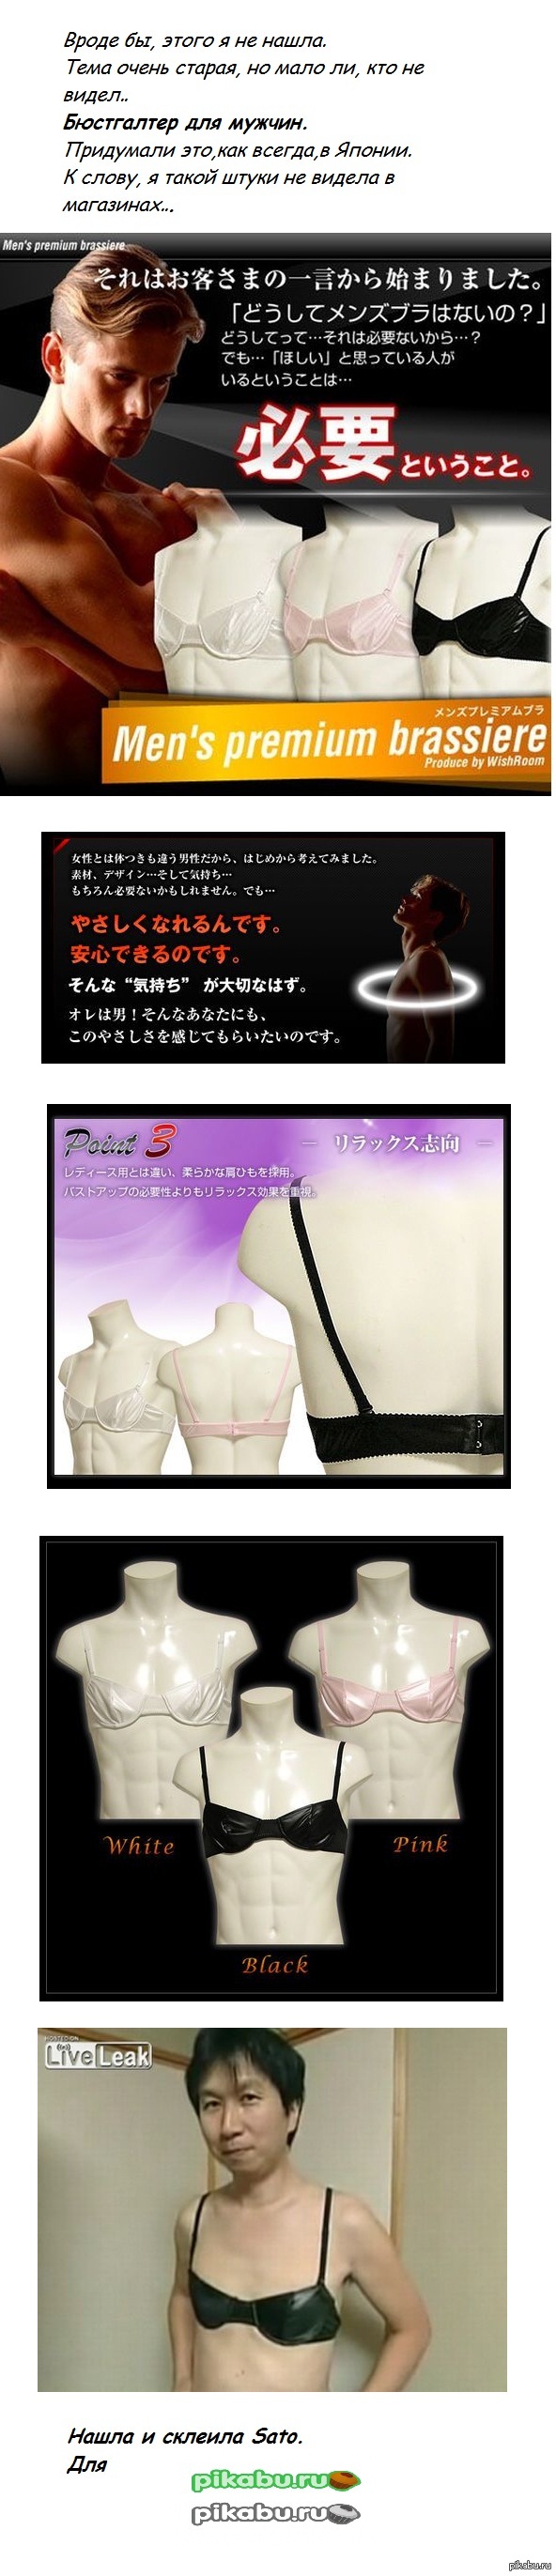 Bra for men or Oh, this mysterious Japanese soul! - NSFW, My, Japanese, The male, Bra, Men